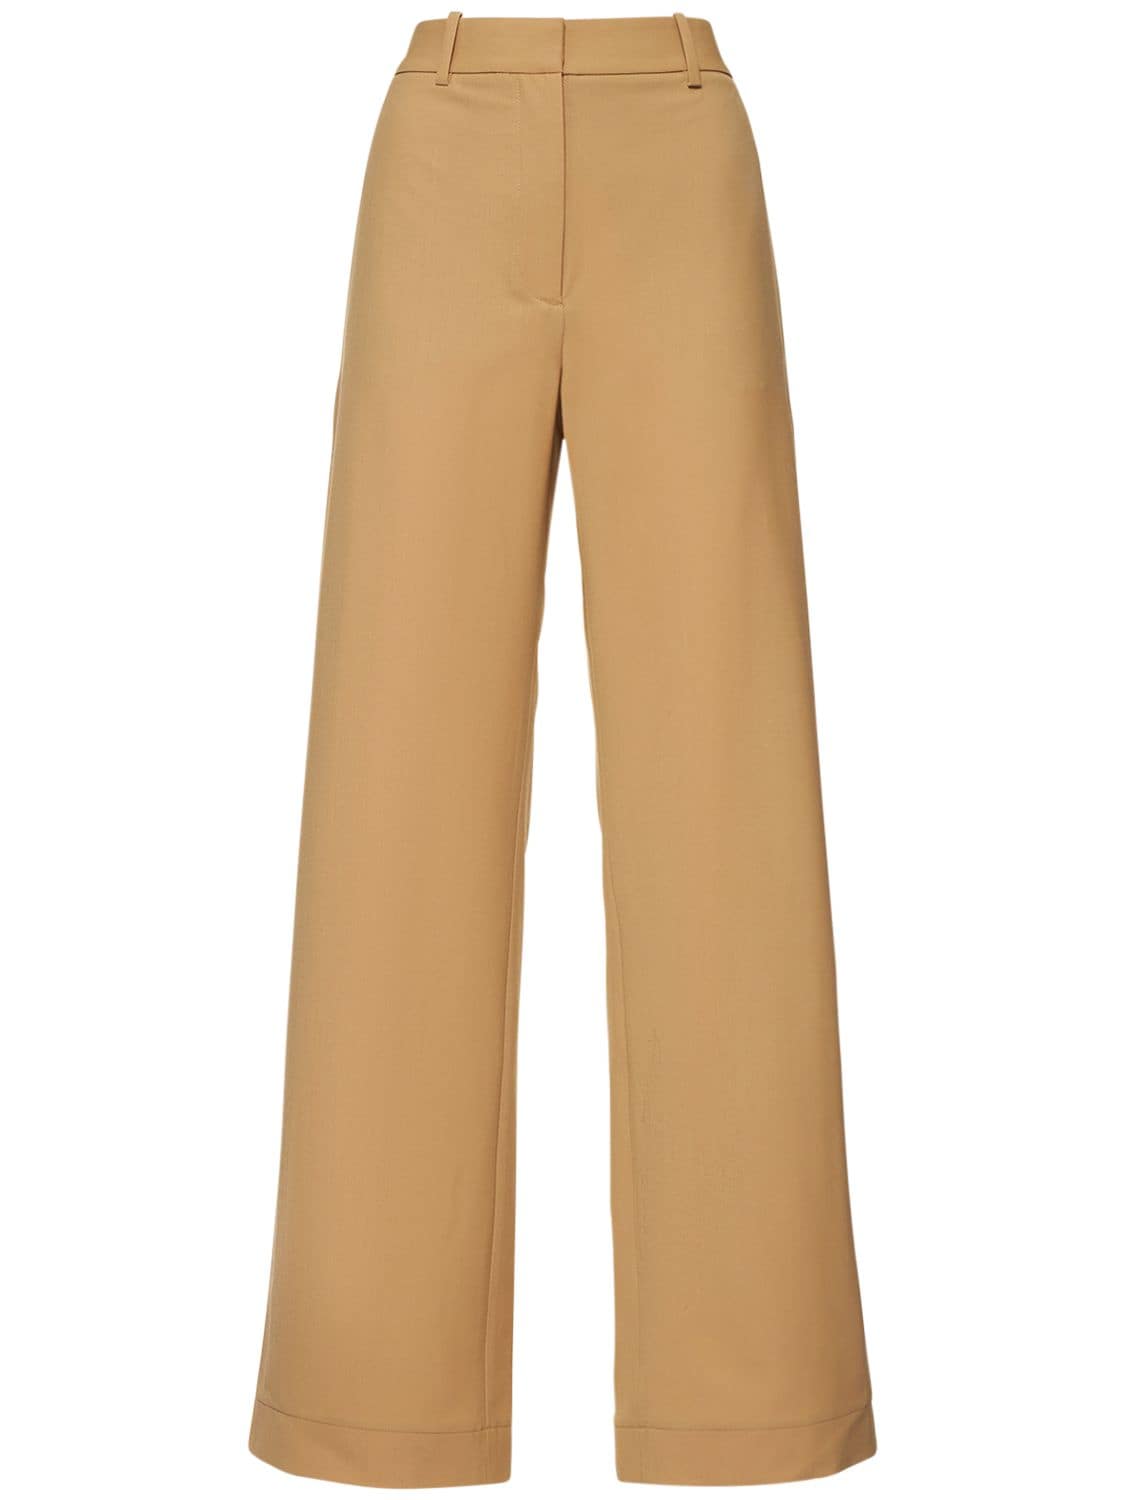 Co Wool Blend Twill Pleated Pants - thompsonphysicaltherapy.com